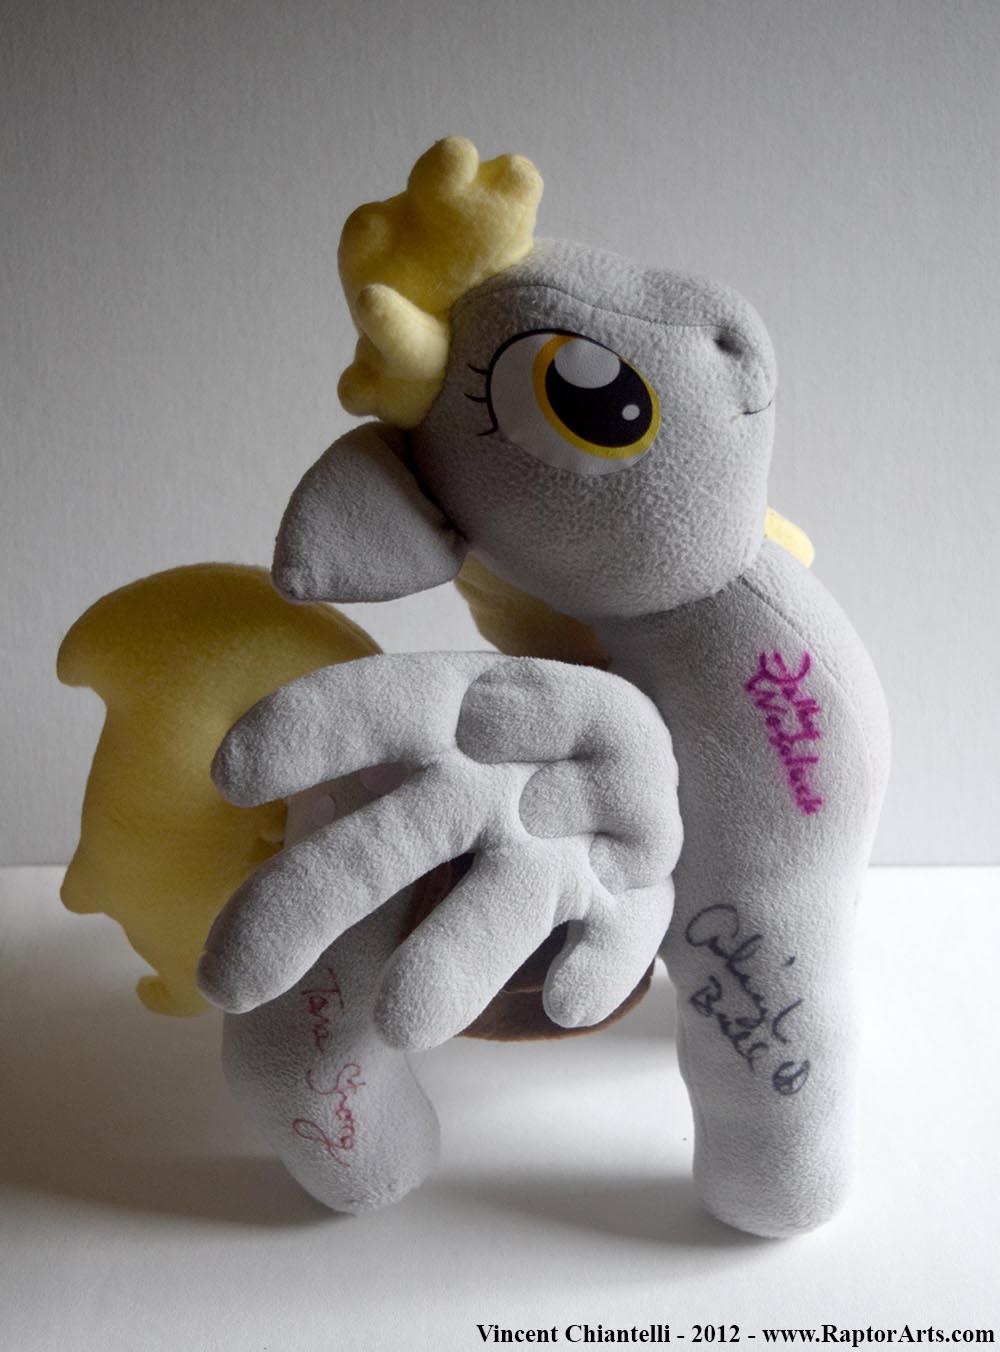 My Derpy Autographed Plush up for Sale!